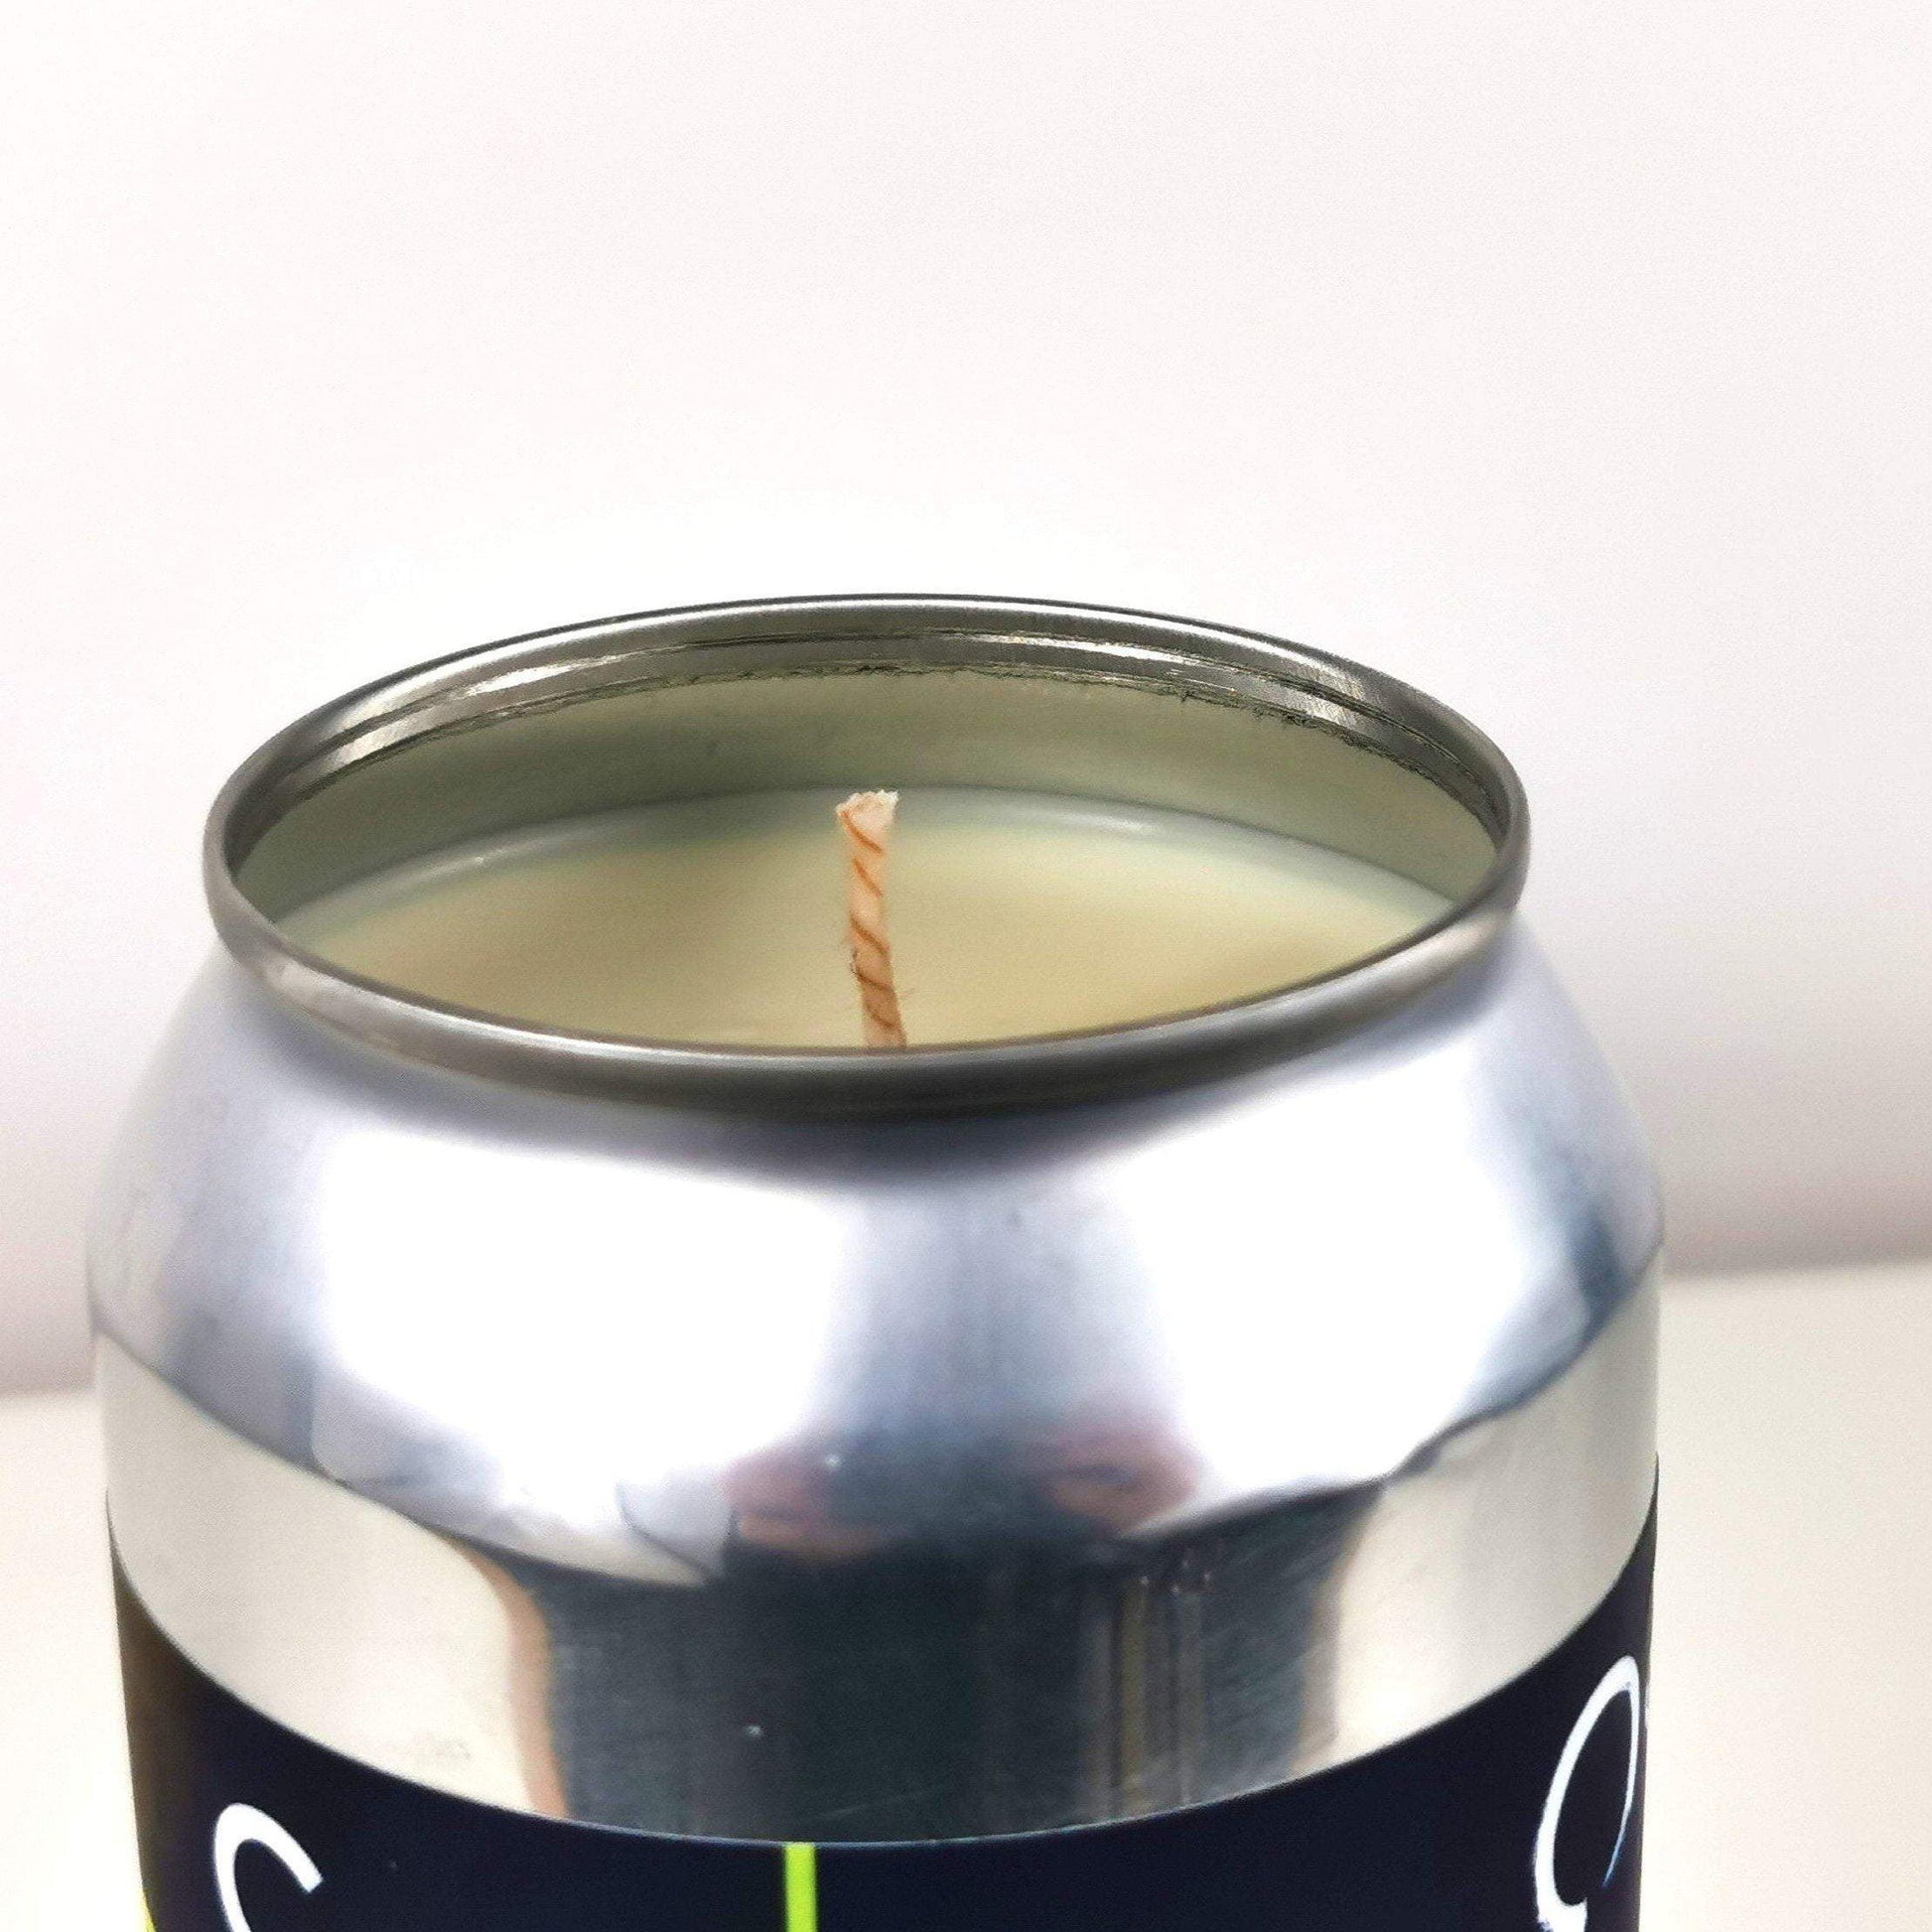 C by Equilibrium Brewery Craft Beer Can Candle Beer Can Candles Adhock Homeware